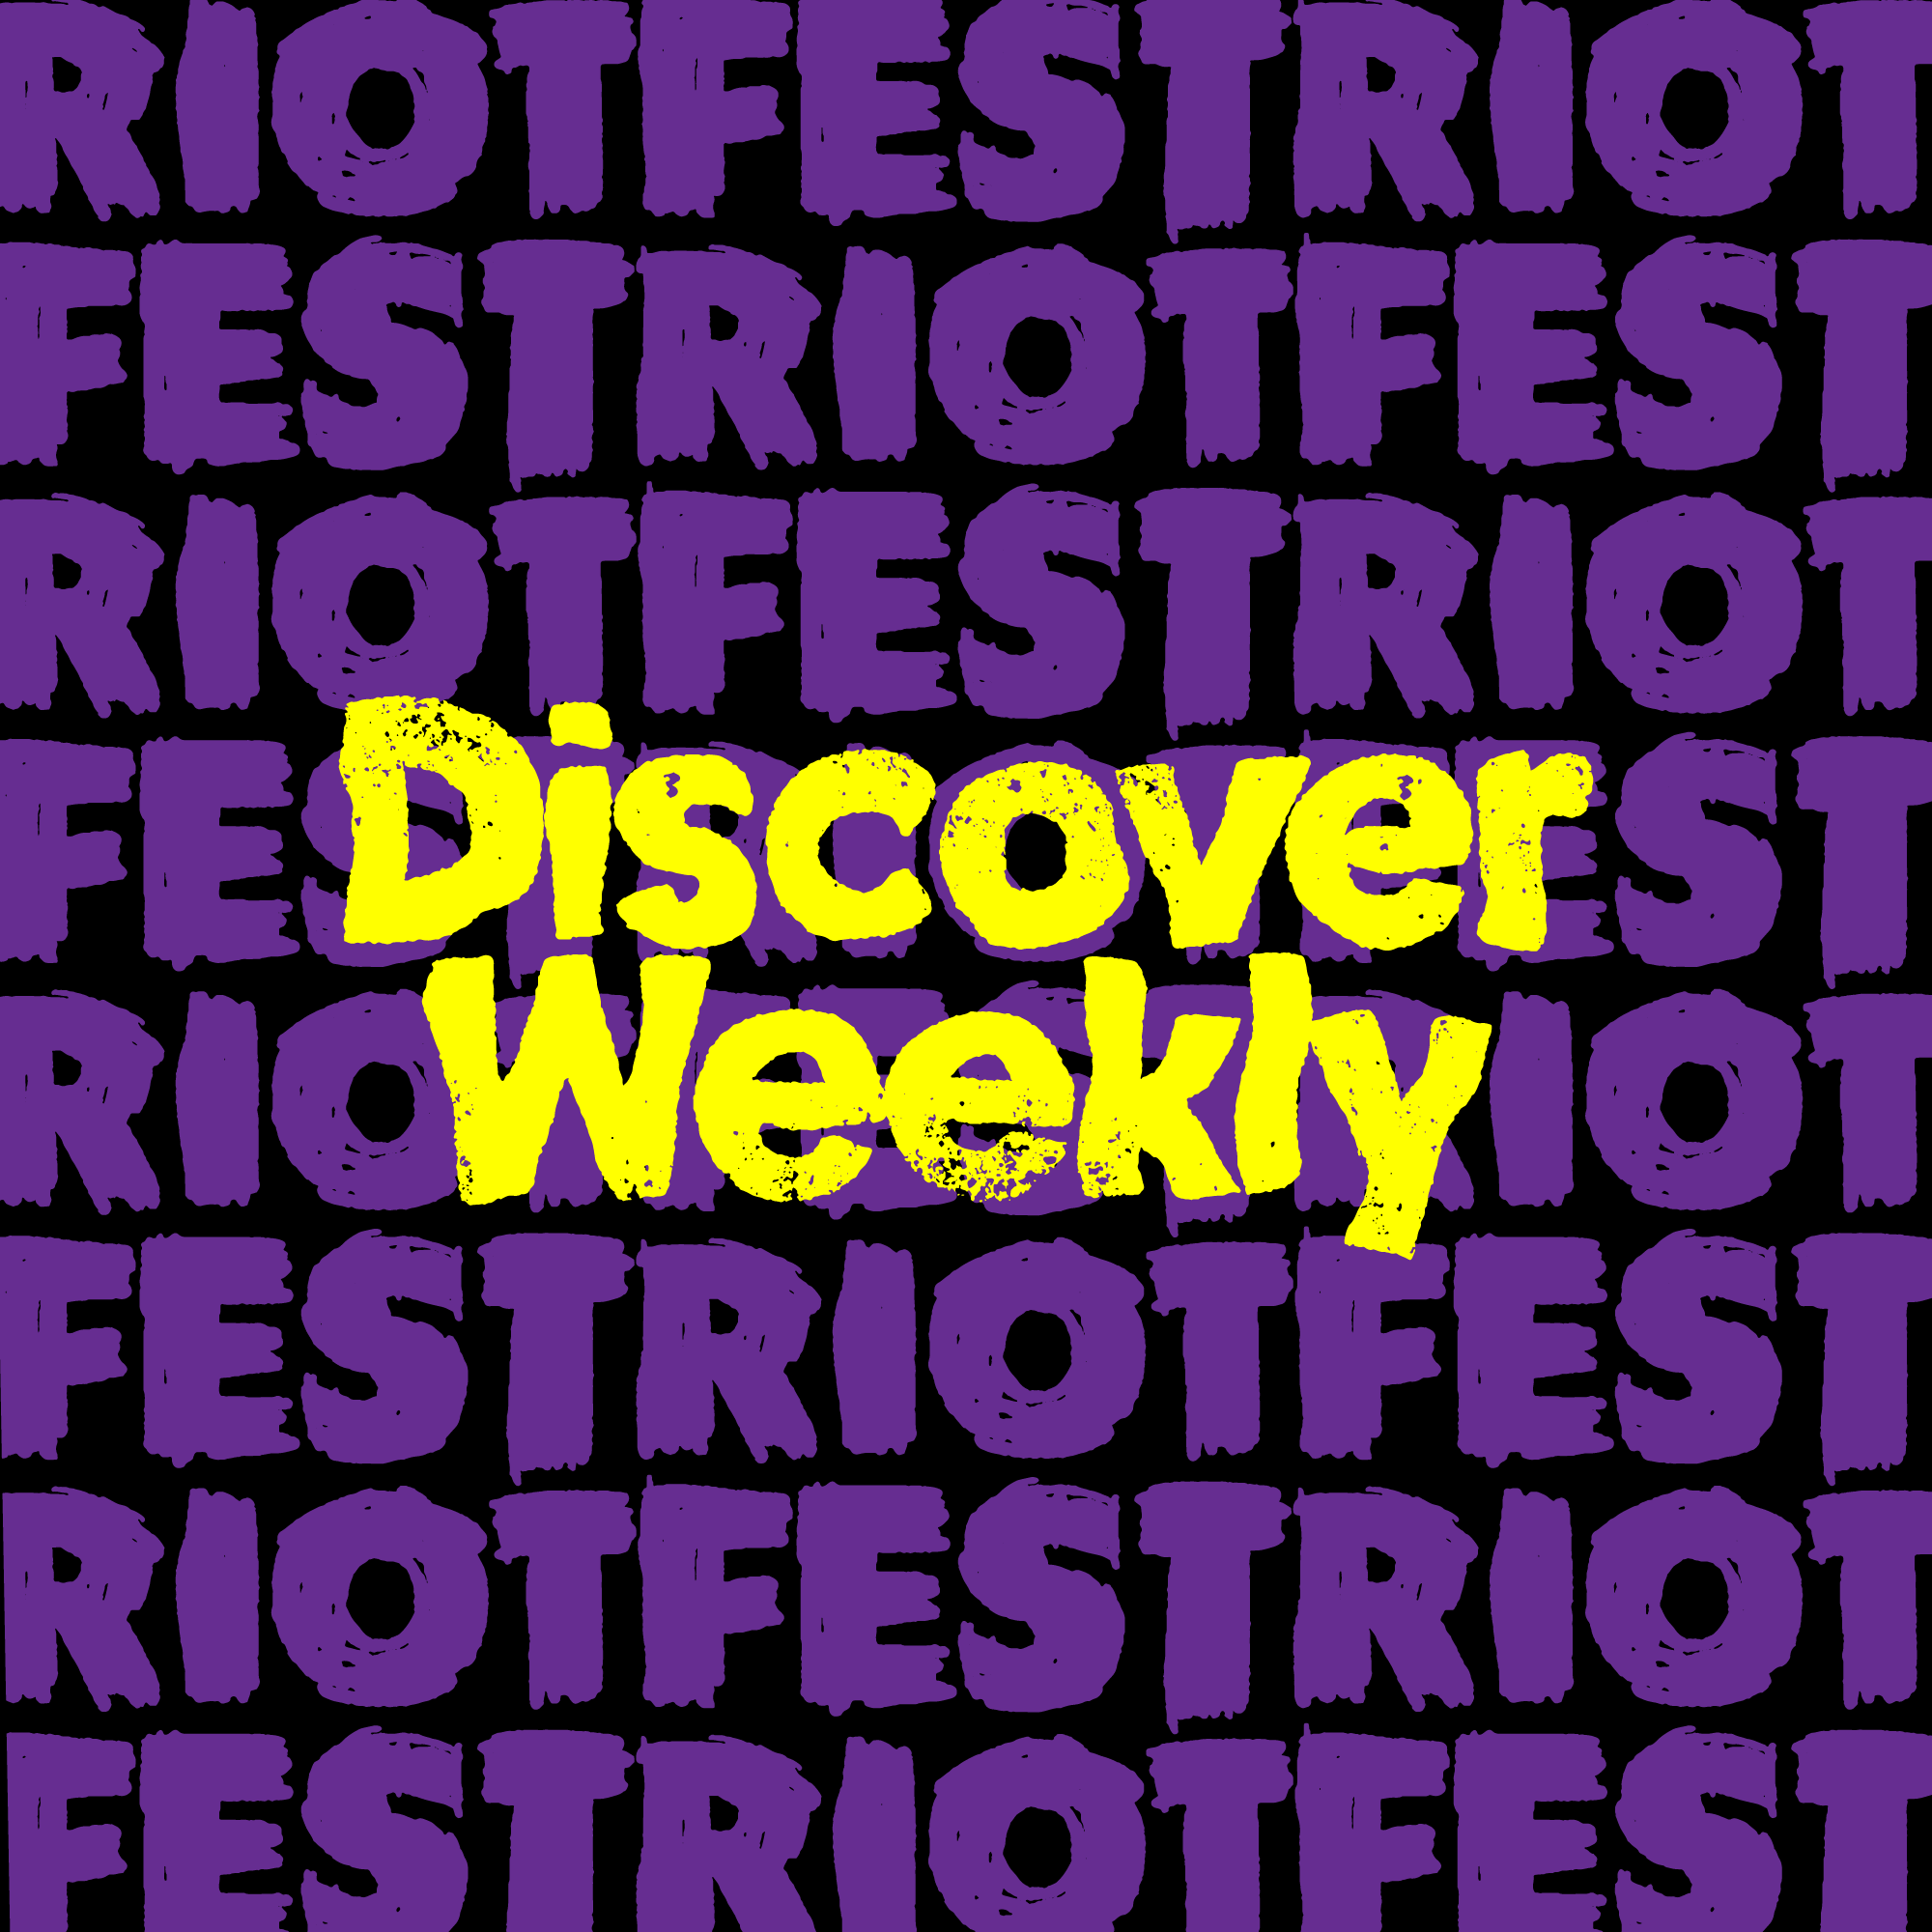 Riot Fest's Discover Weekly Playlist